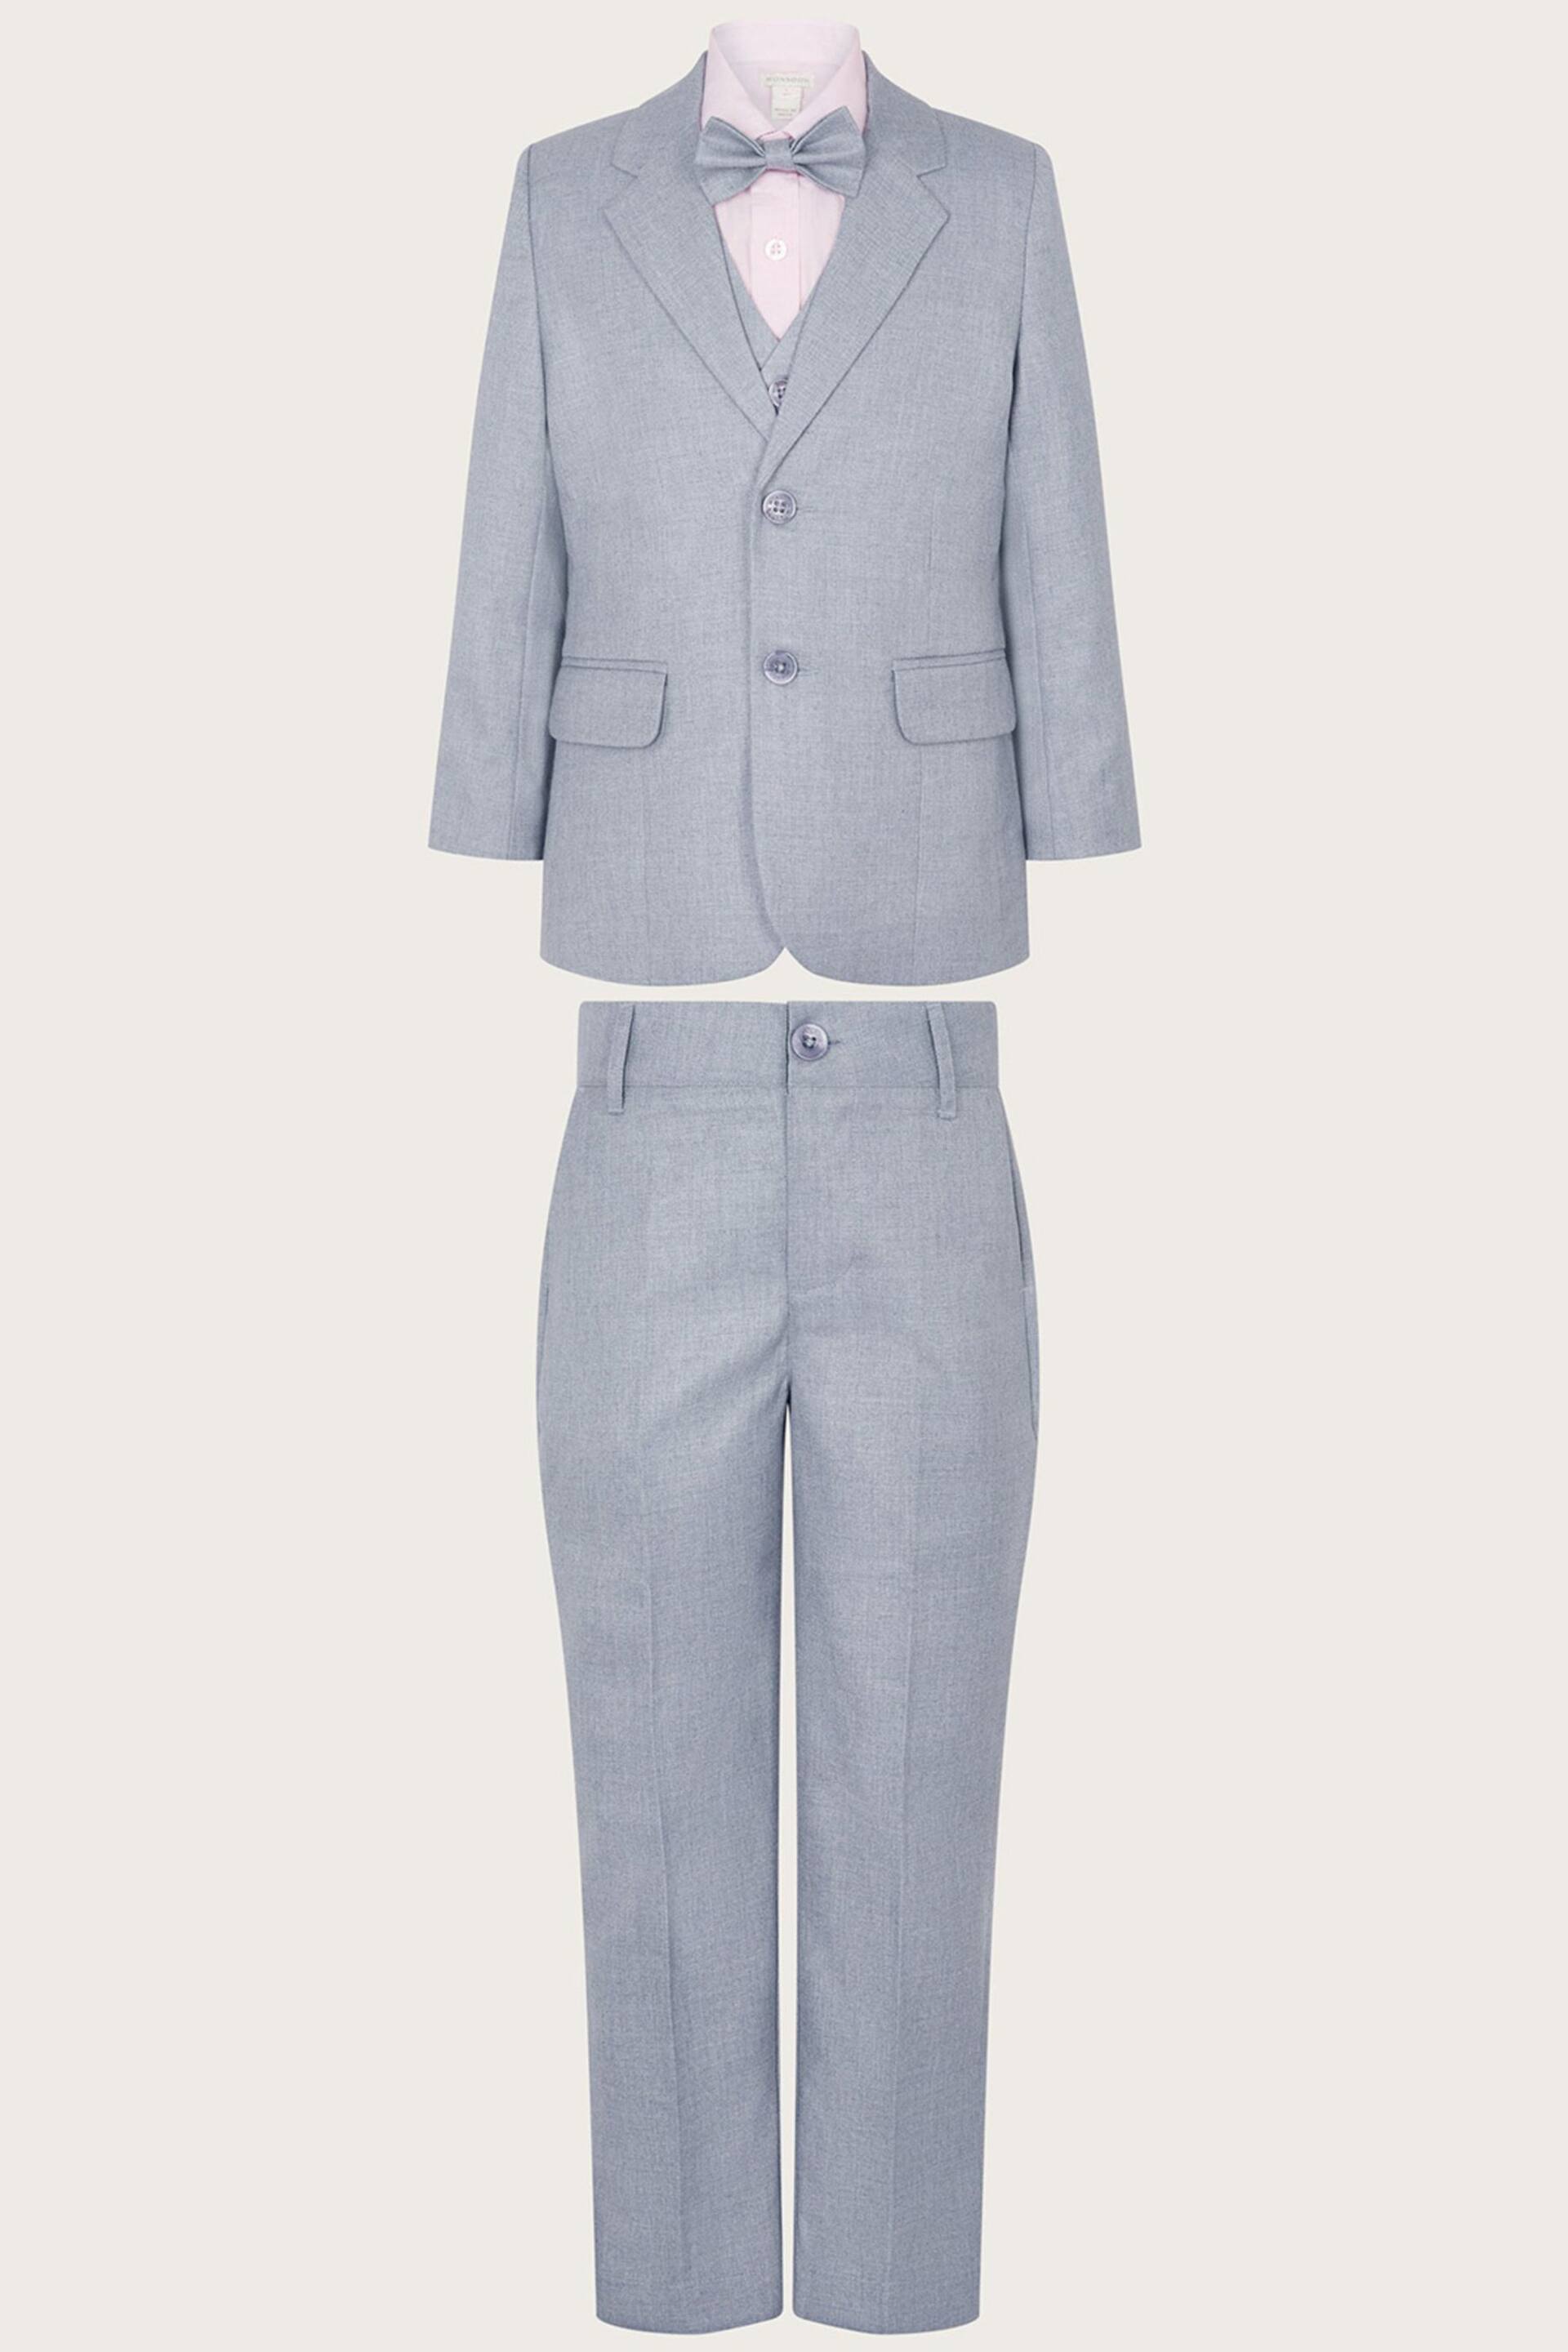 Monsoon Grey 5 Piece Suit - Image 1 of 3